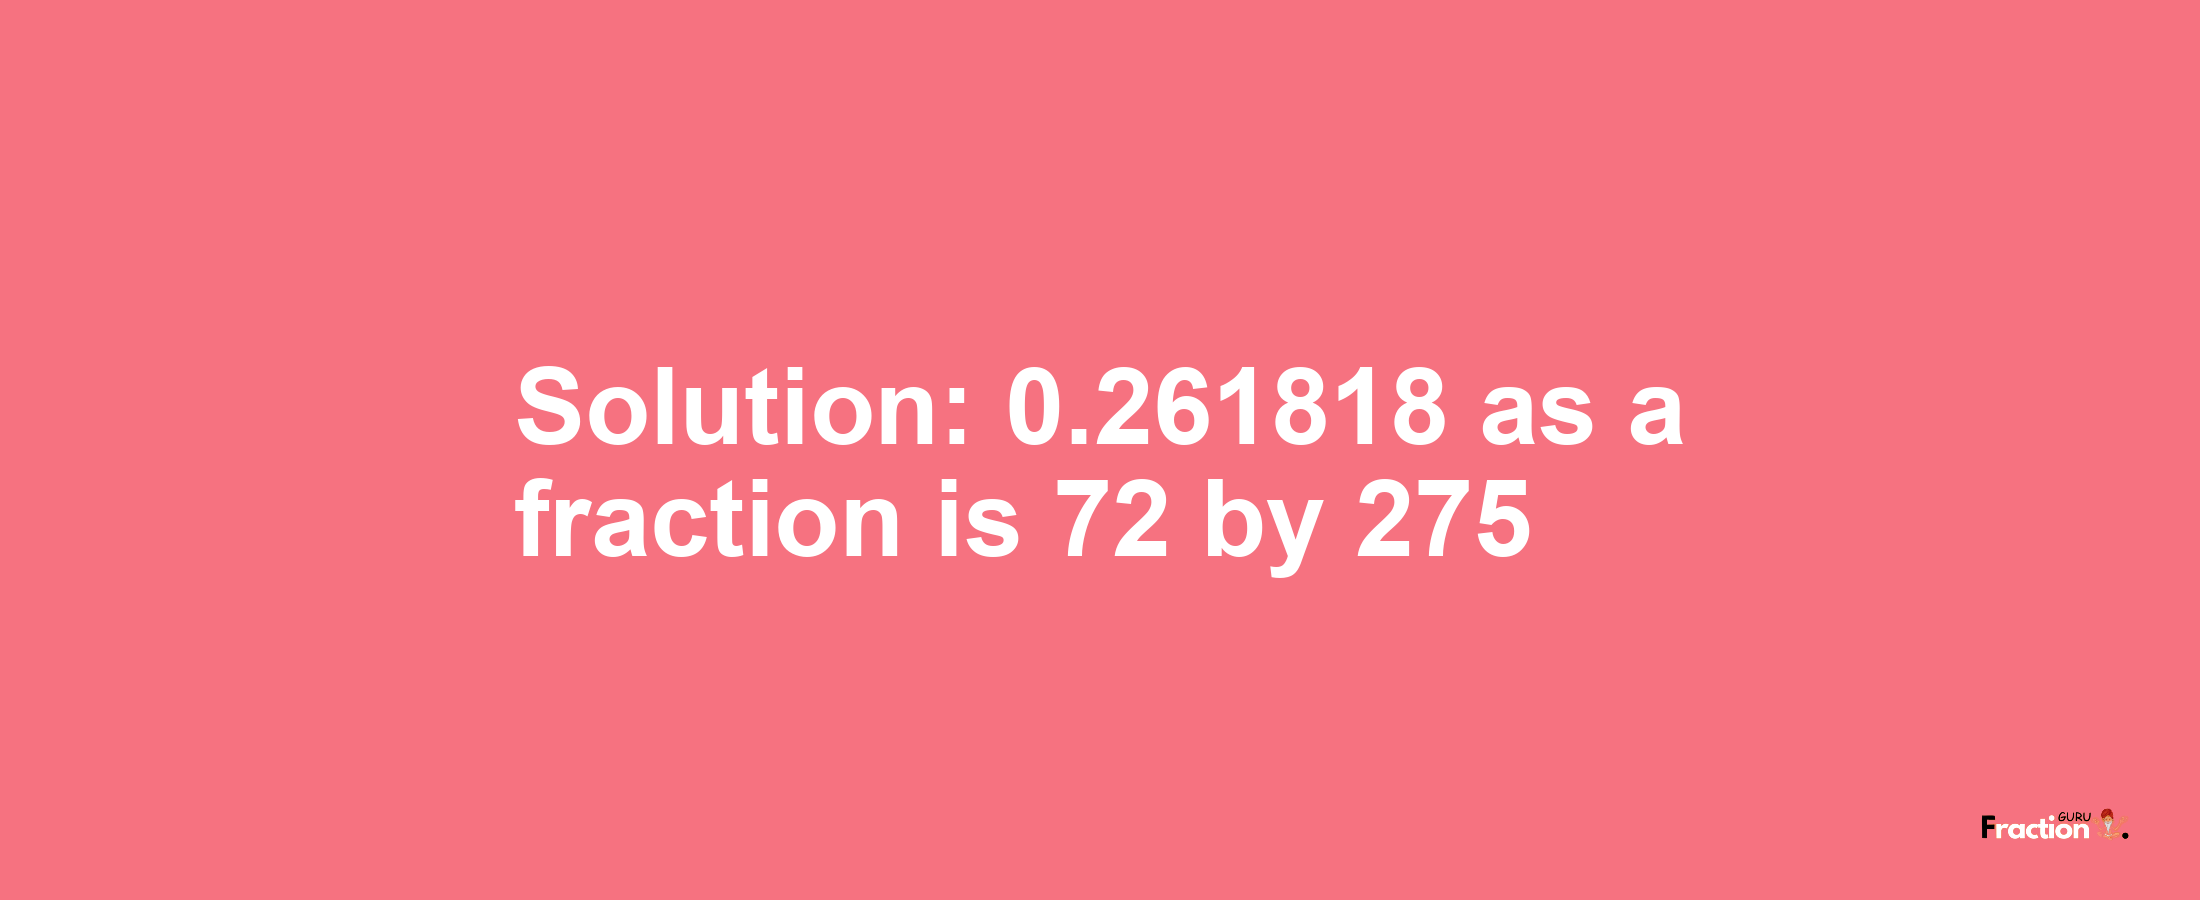 Solution:0.261818 as a fraction is 72/275